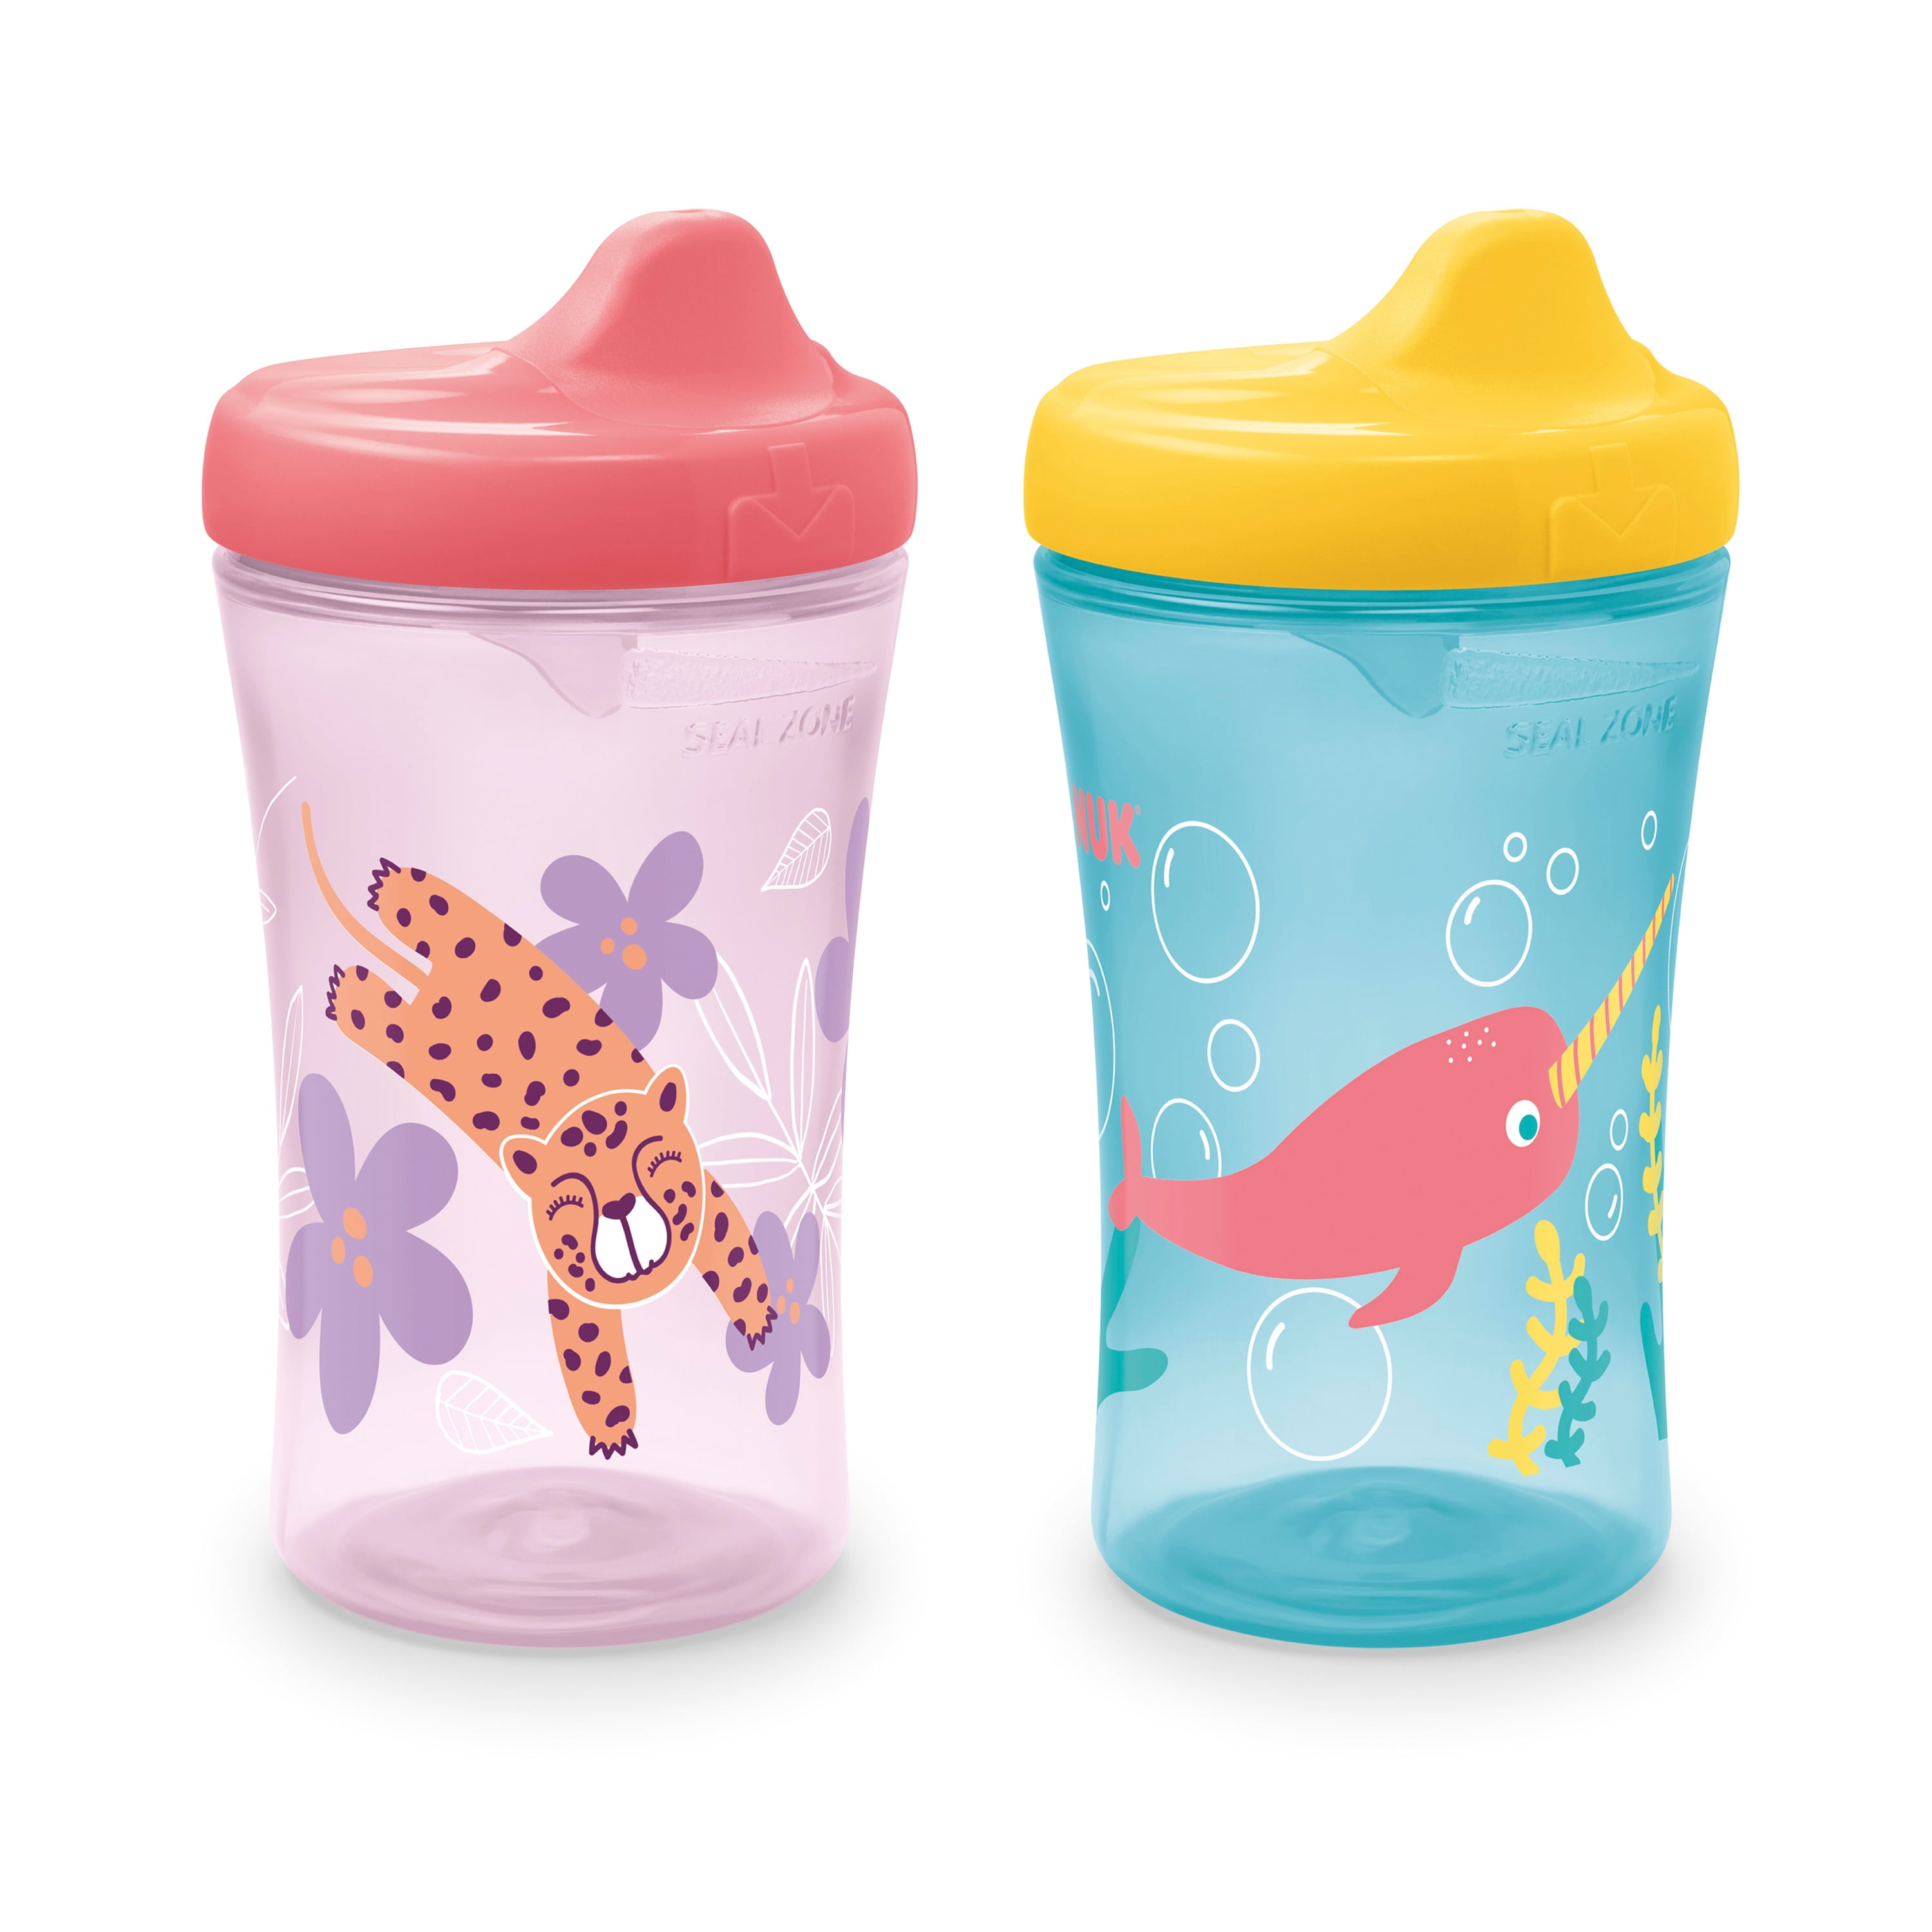 NUK Advanced Spill Proof Hard Spout Sippy Cup, 10 oz, Girl